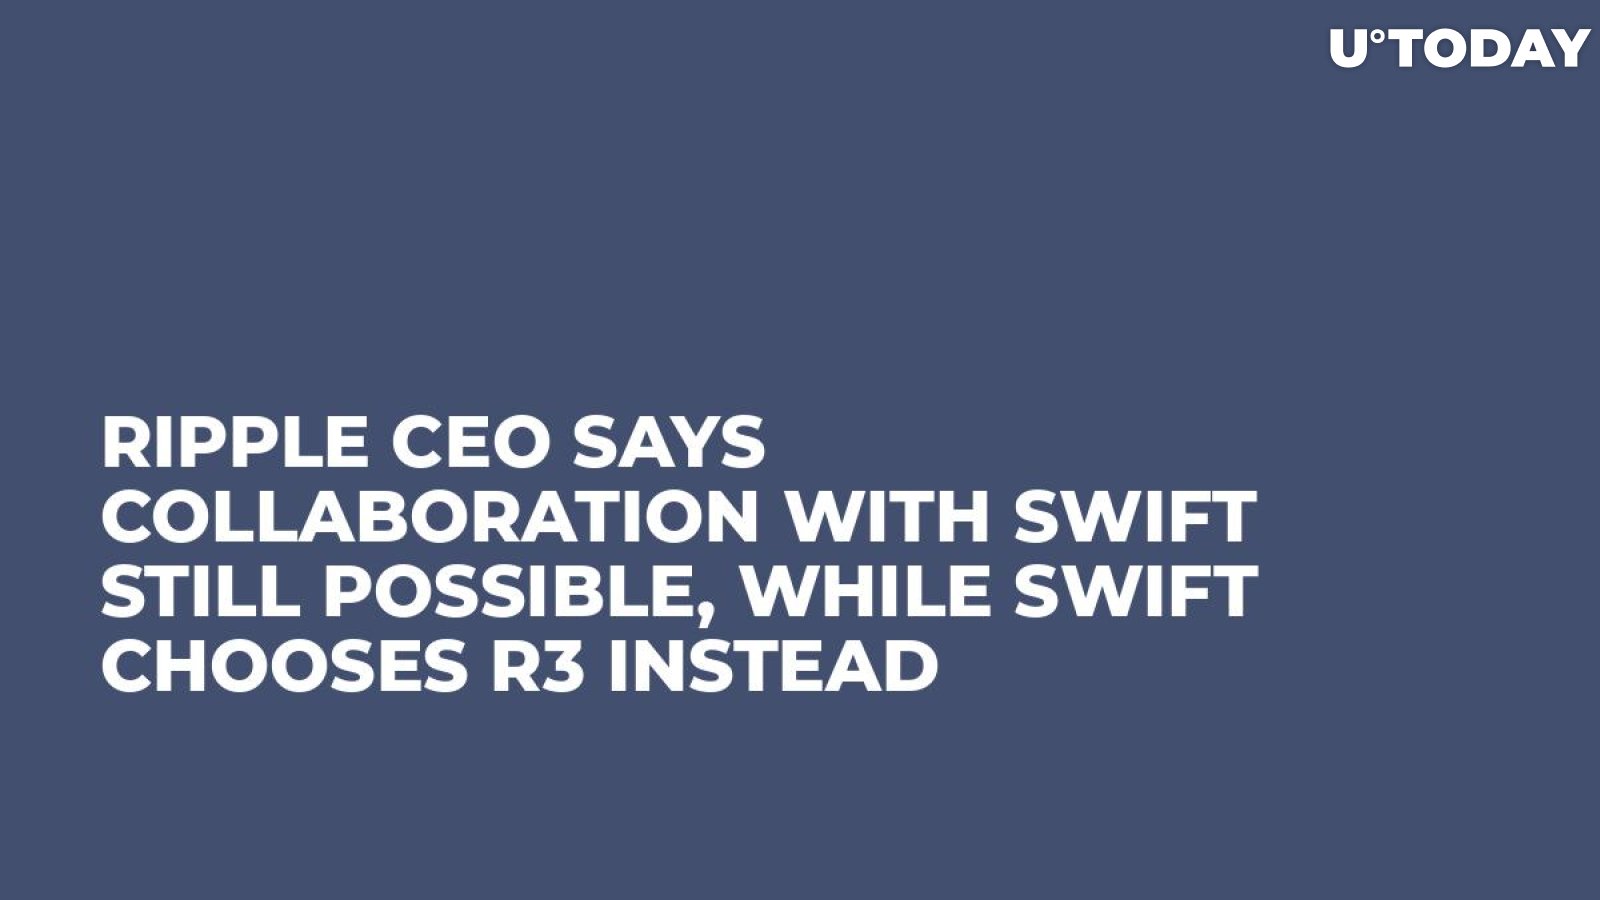 Ripple CEO Says Collaboration with Swift Still Possible, While Swift Chooses R3 Instead